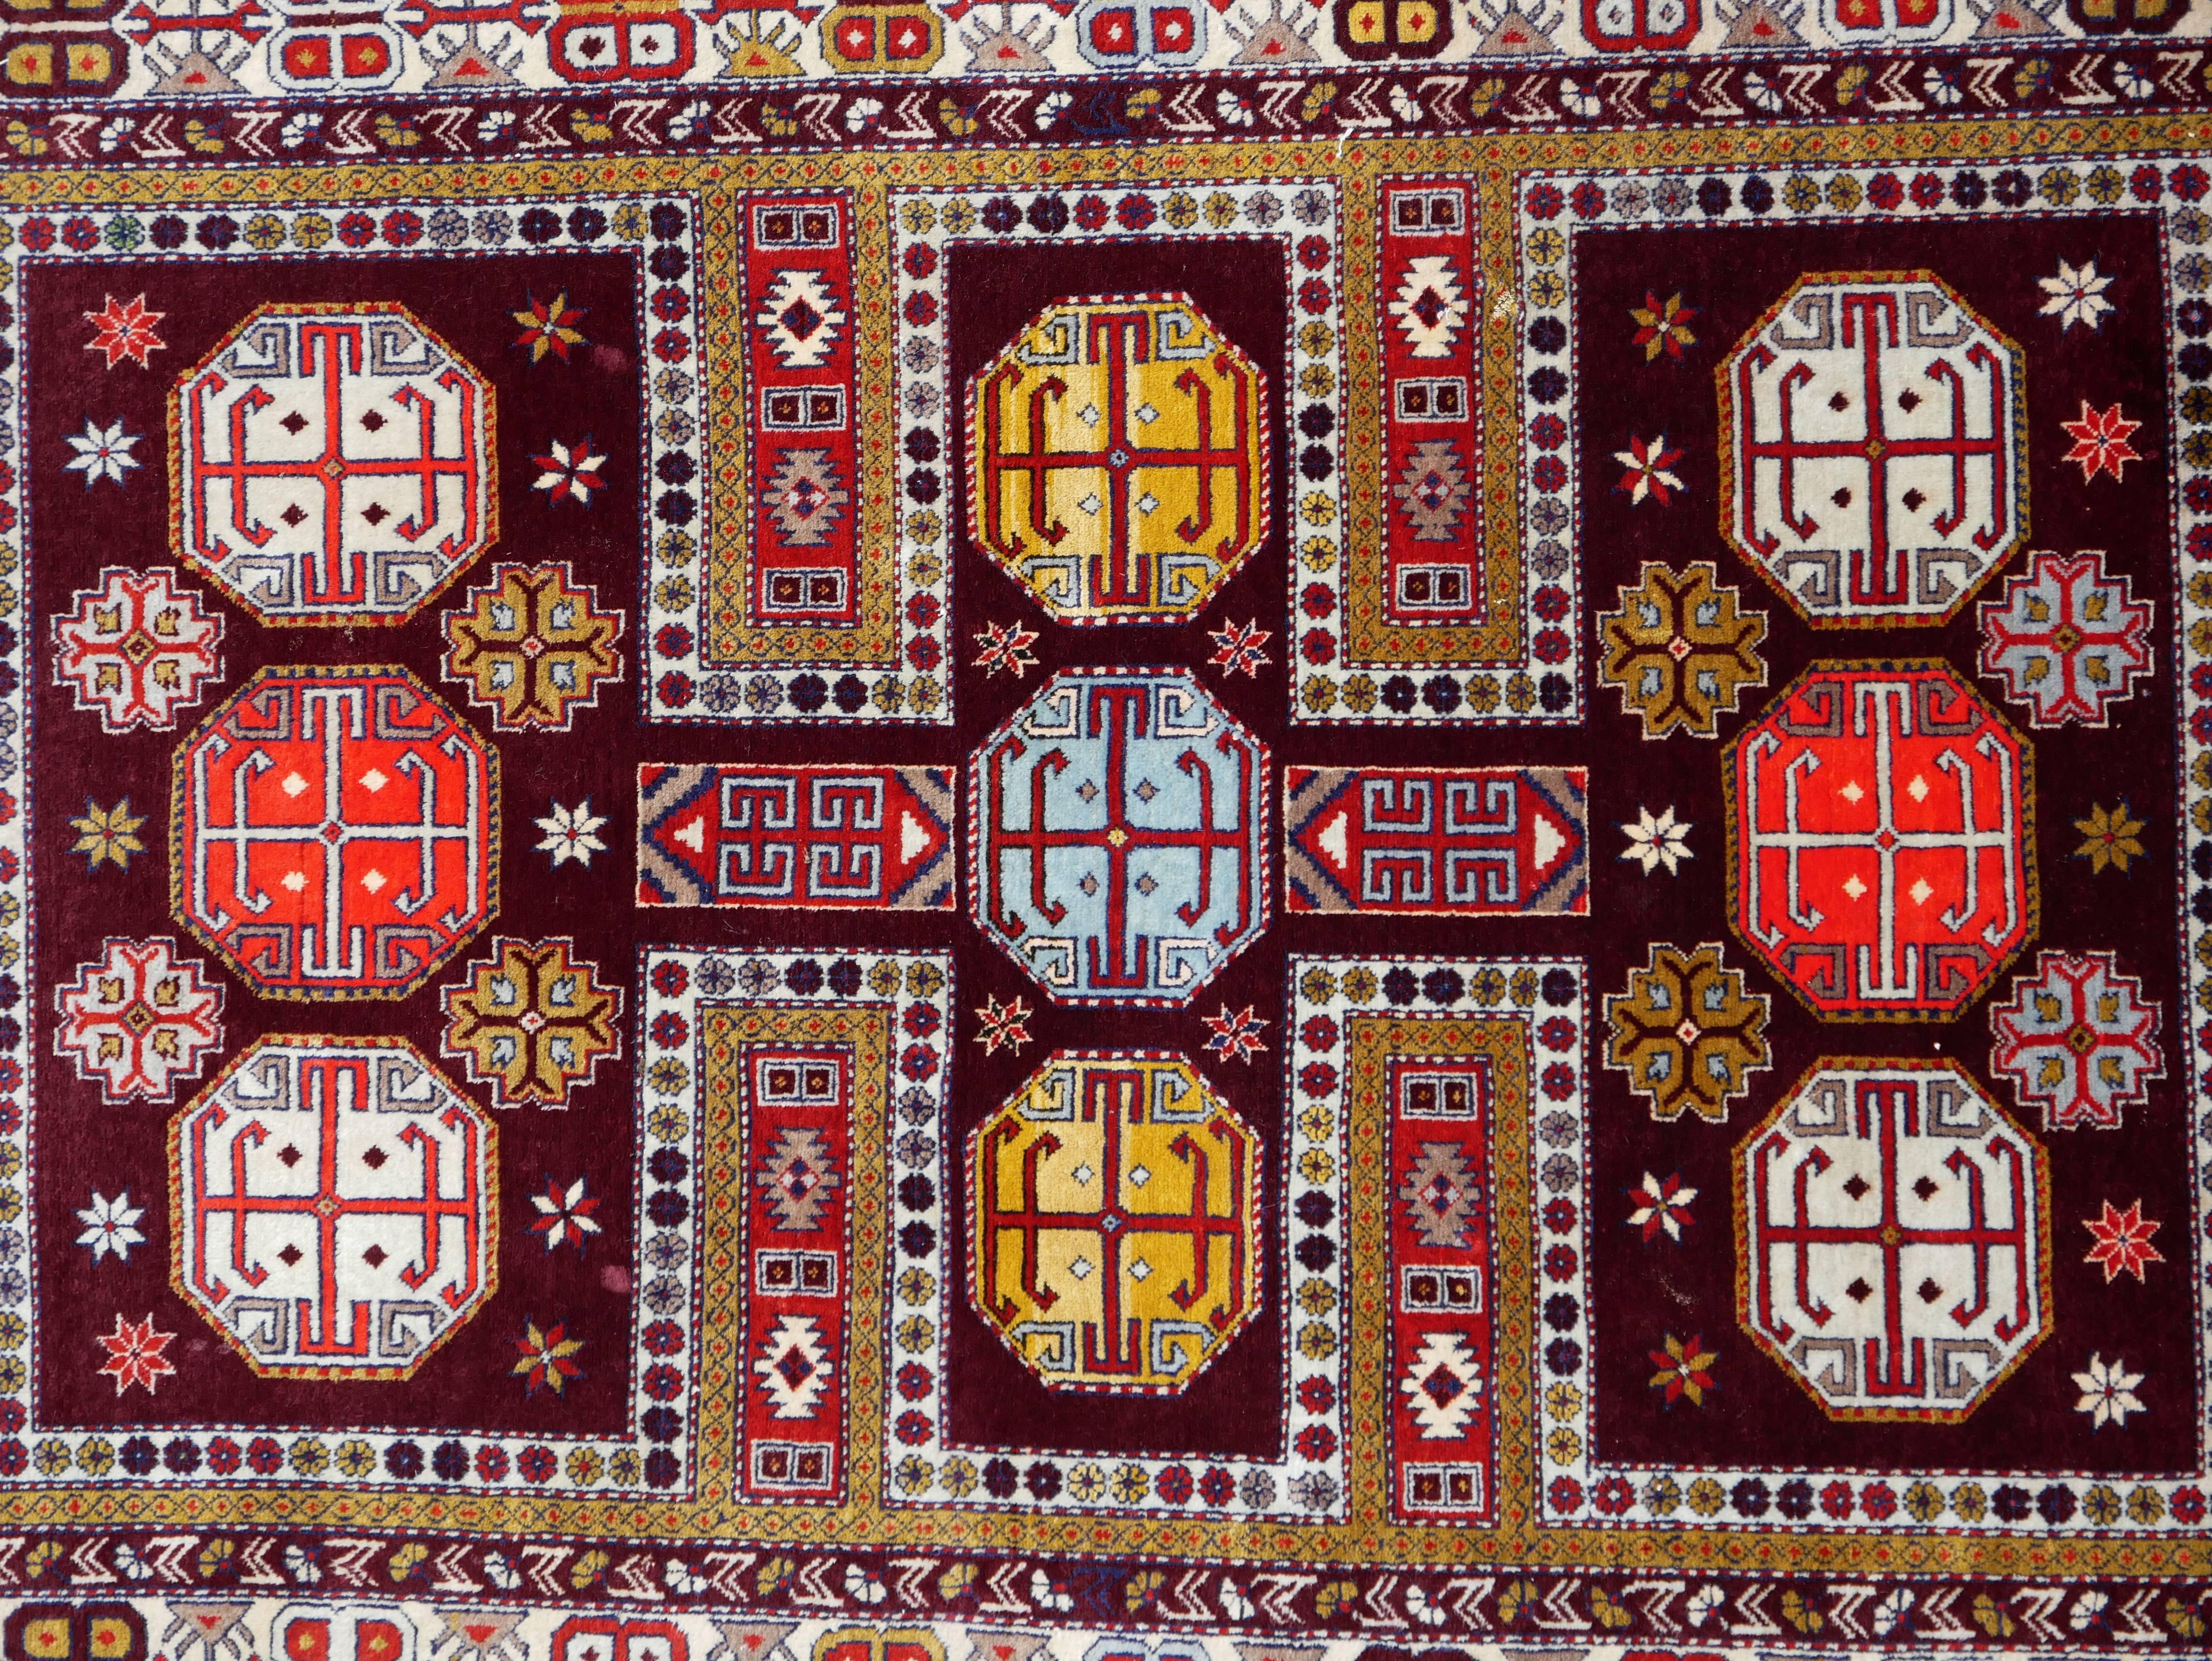 This is an early 20th century Caucasian rug from the town of Derbent on the shores of the Caspian Sea in Russia.
It features an array of multi-color geometric figures set in a deep, aged burgundy field. 
 
Dimensions: c. 140 x 200 cm or c. 4.6 x